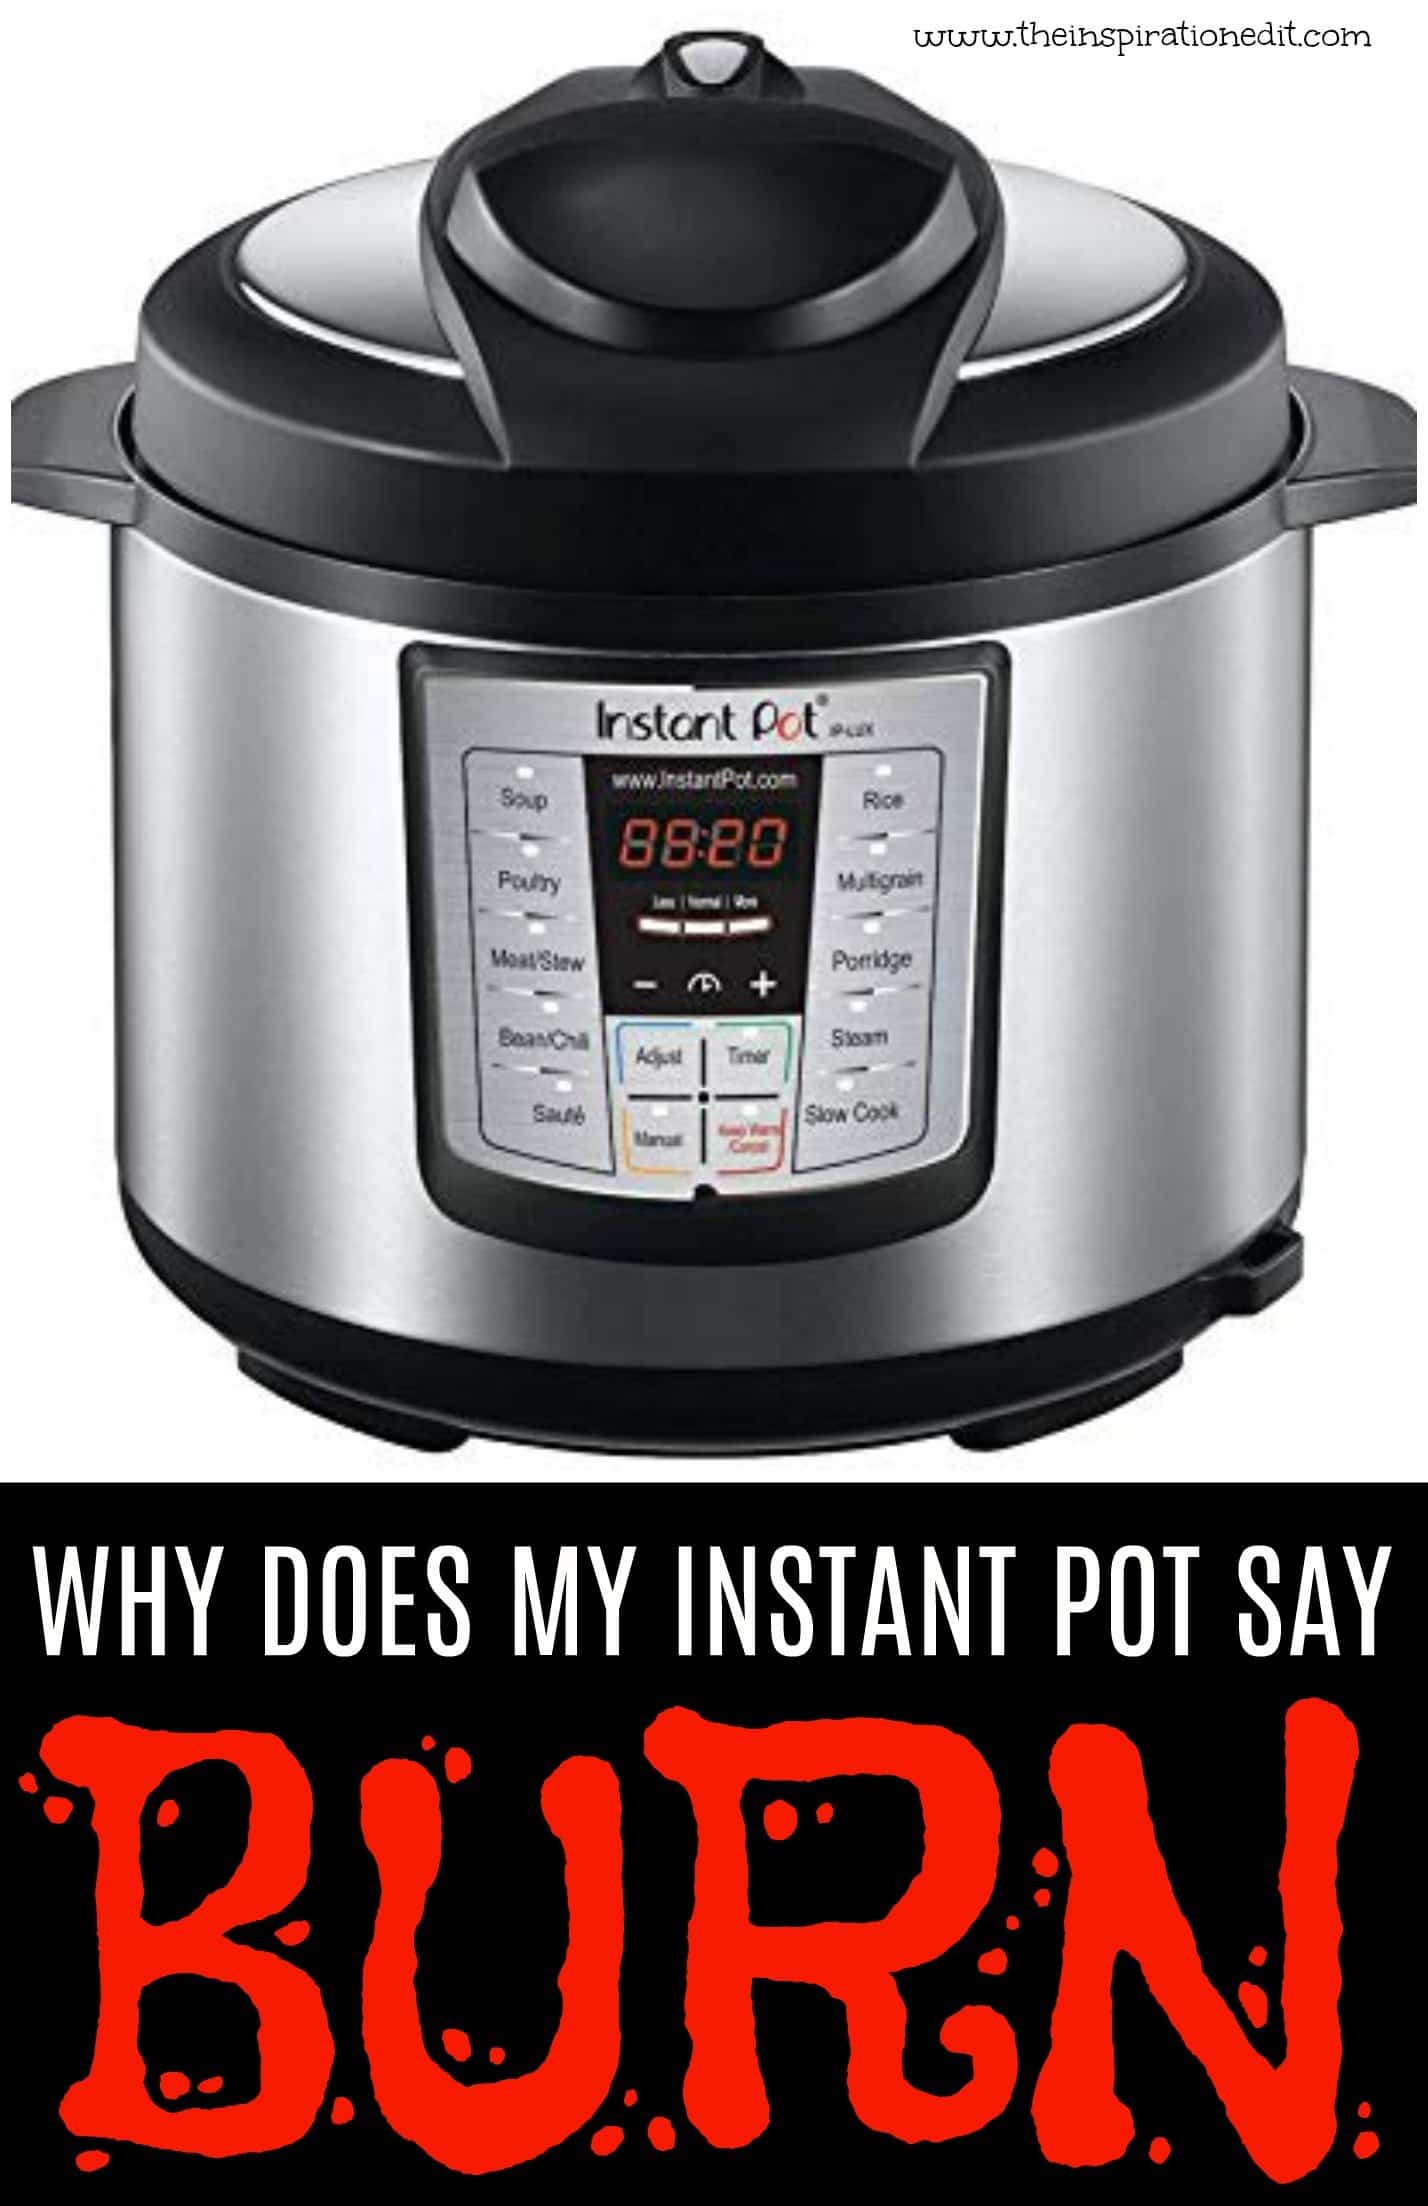 What Does the Instant Pot Burn Notice Mean? · The Inspiration Edit